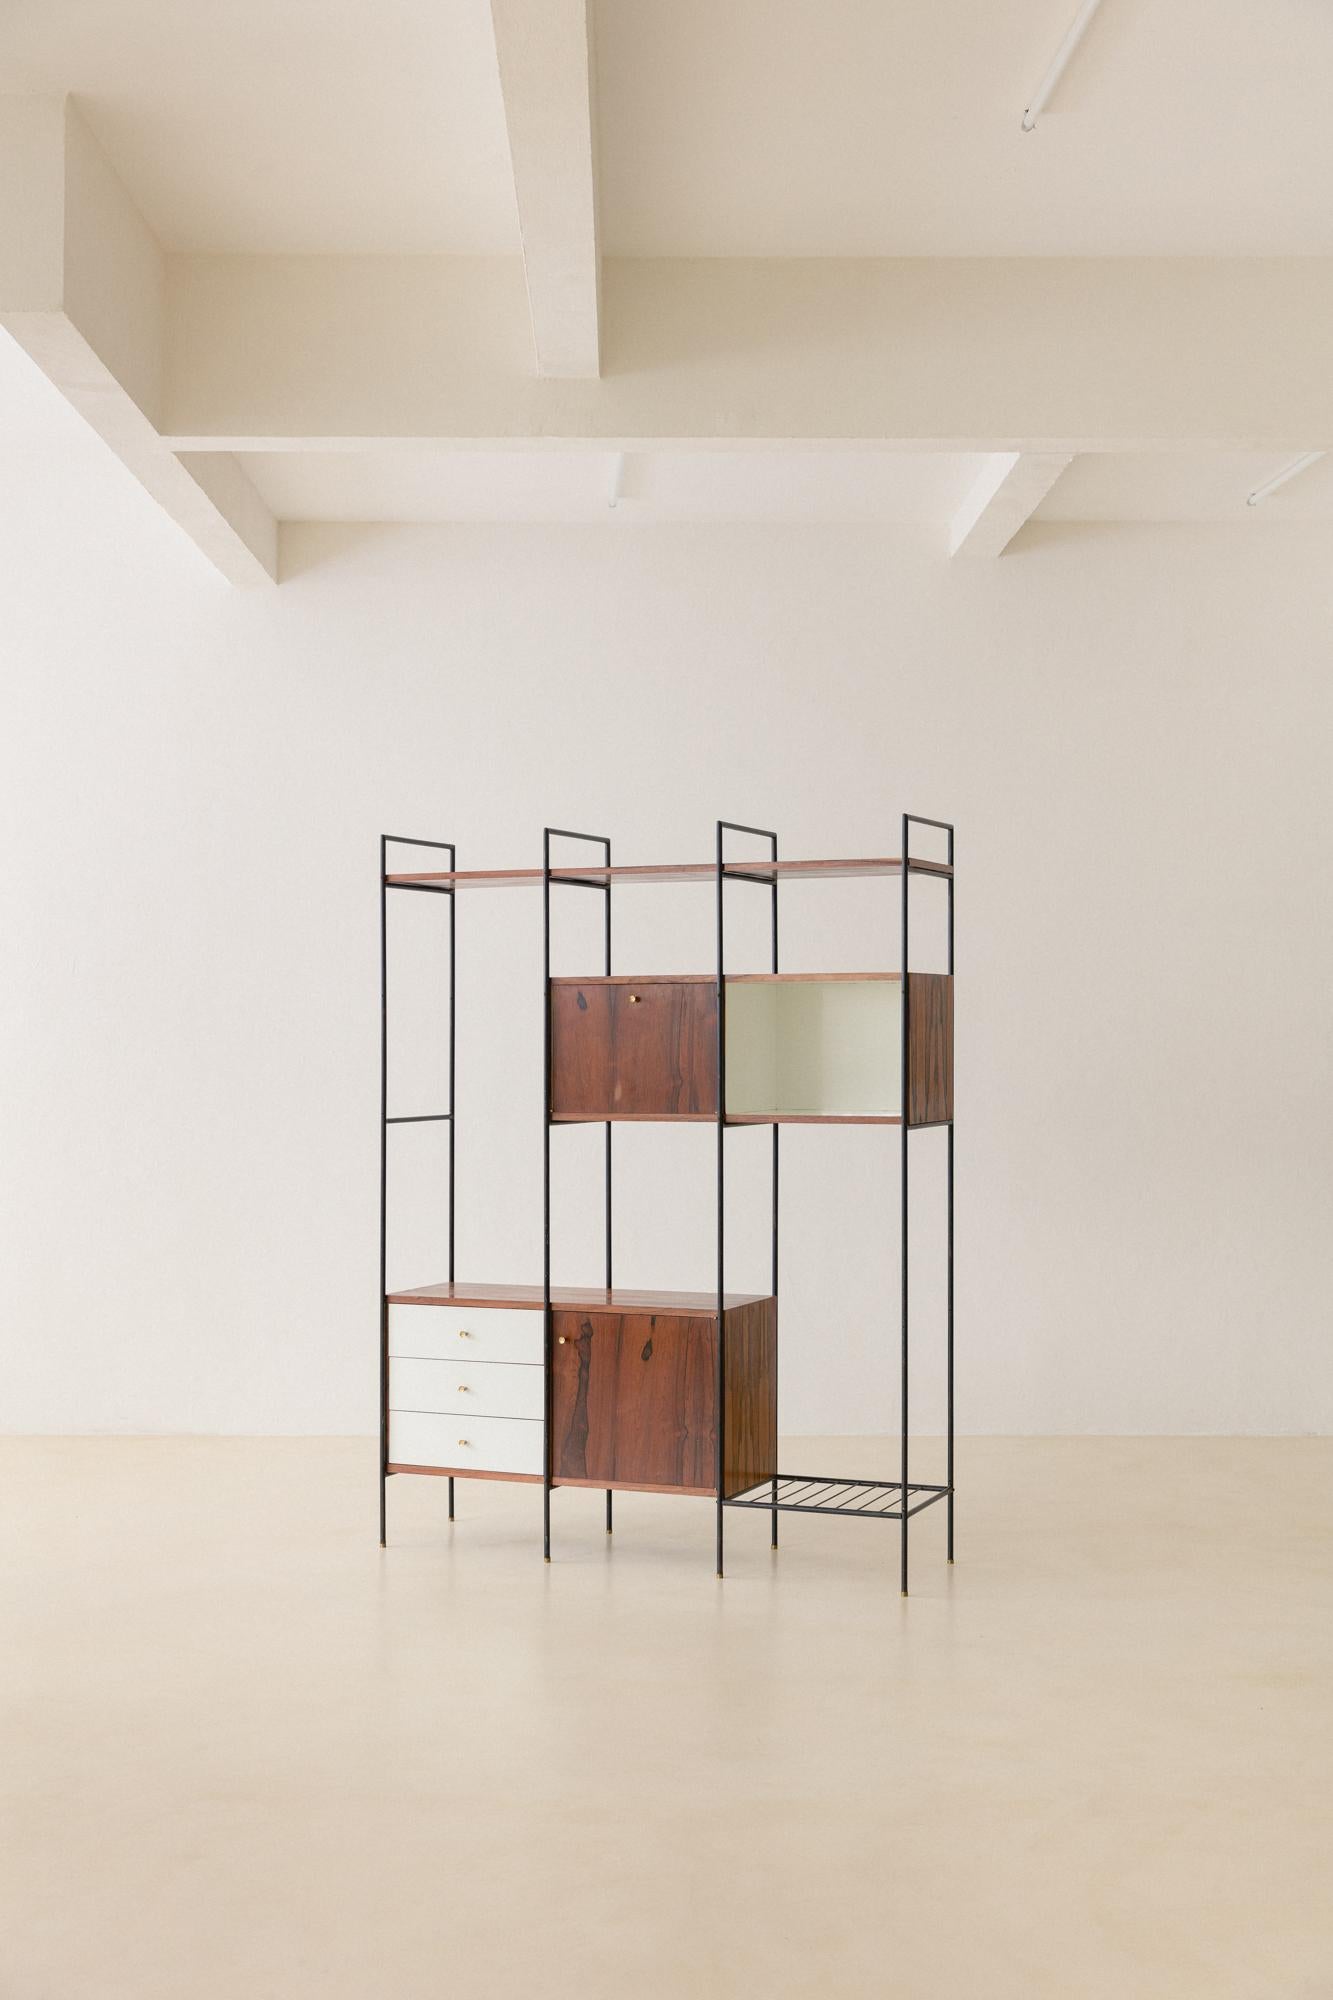 This bookshelf was designed in the 1950s by Geraldo de Barros (1923-1998) and produced by Unilabor. He designed and projected furniture based on his constructive references related to concrete Art. 

Its structure is made of iron, with storage